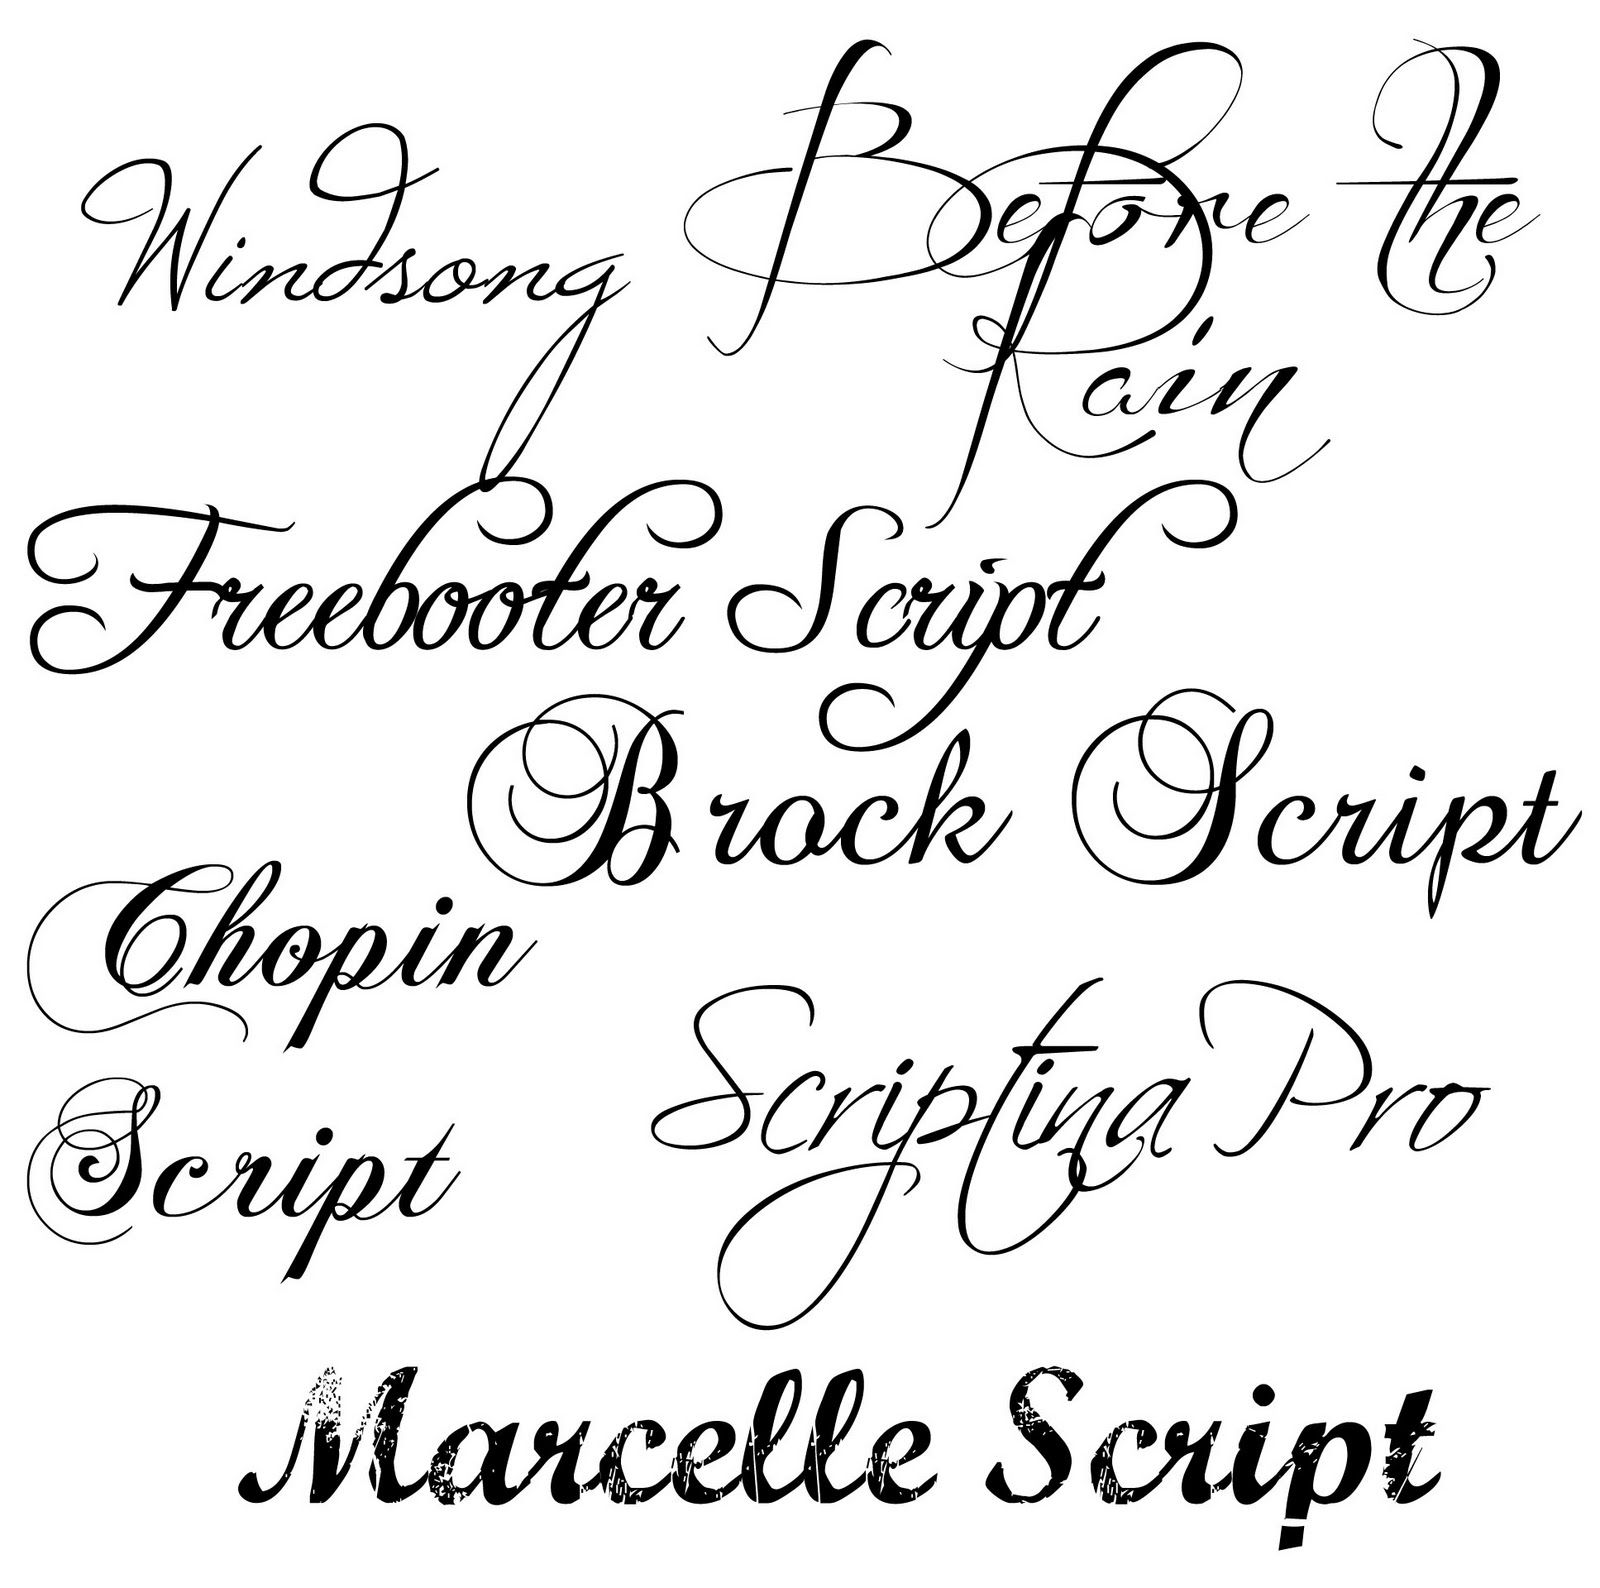 fancy font copy and paste generator